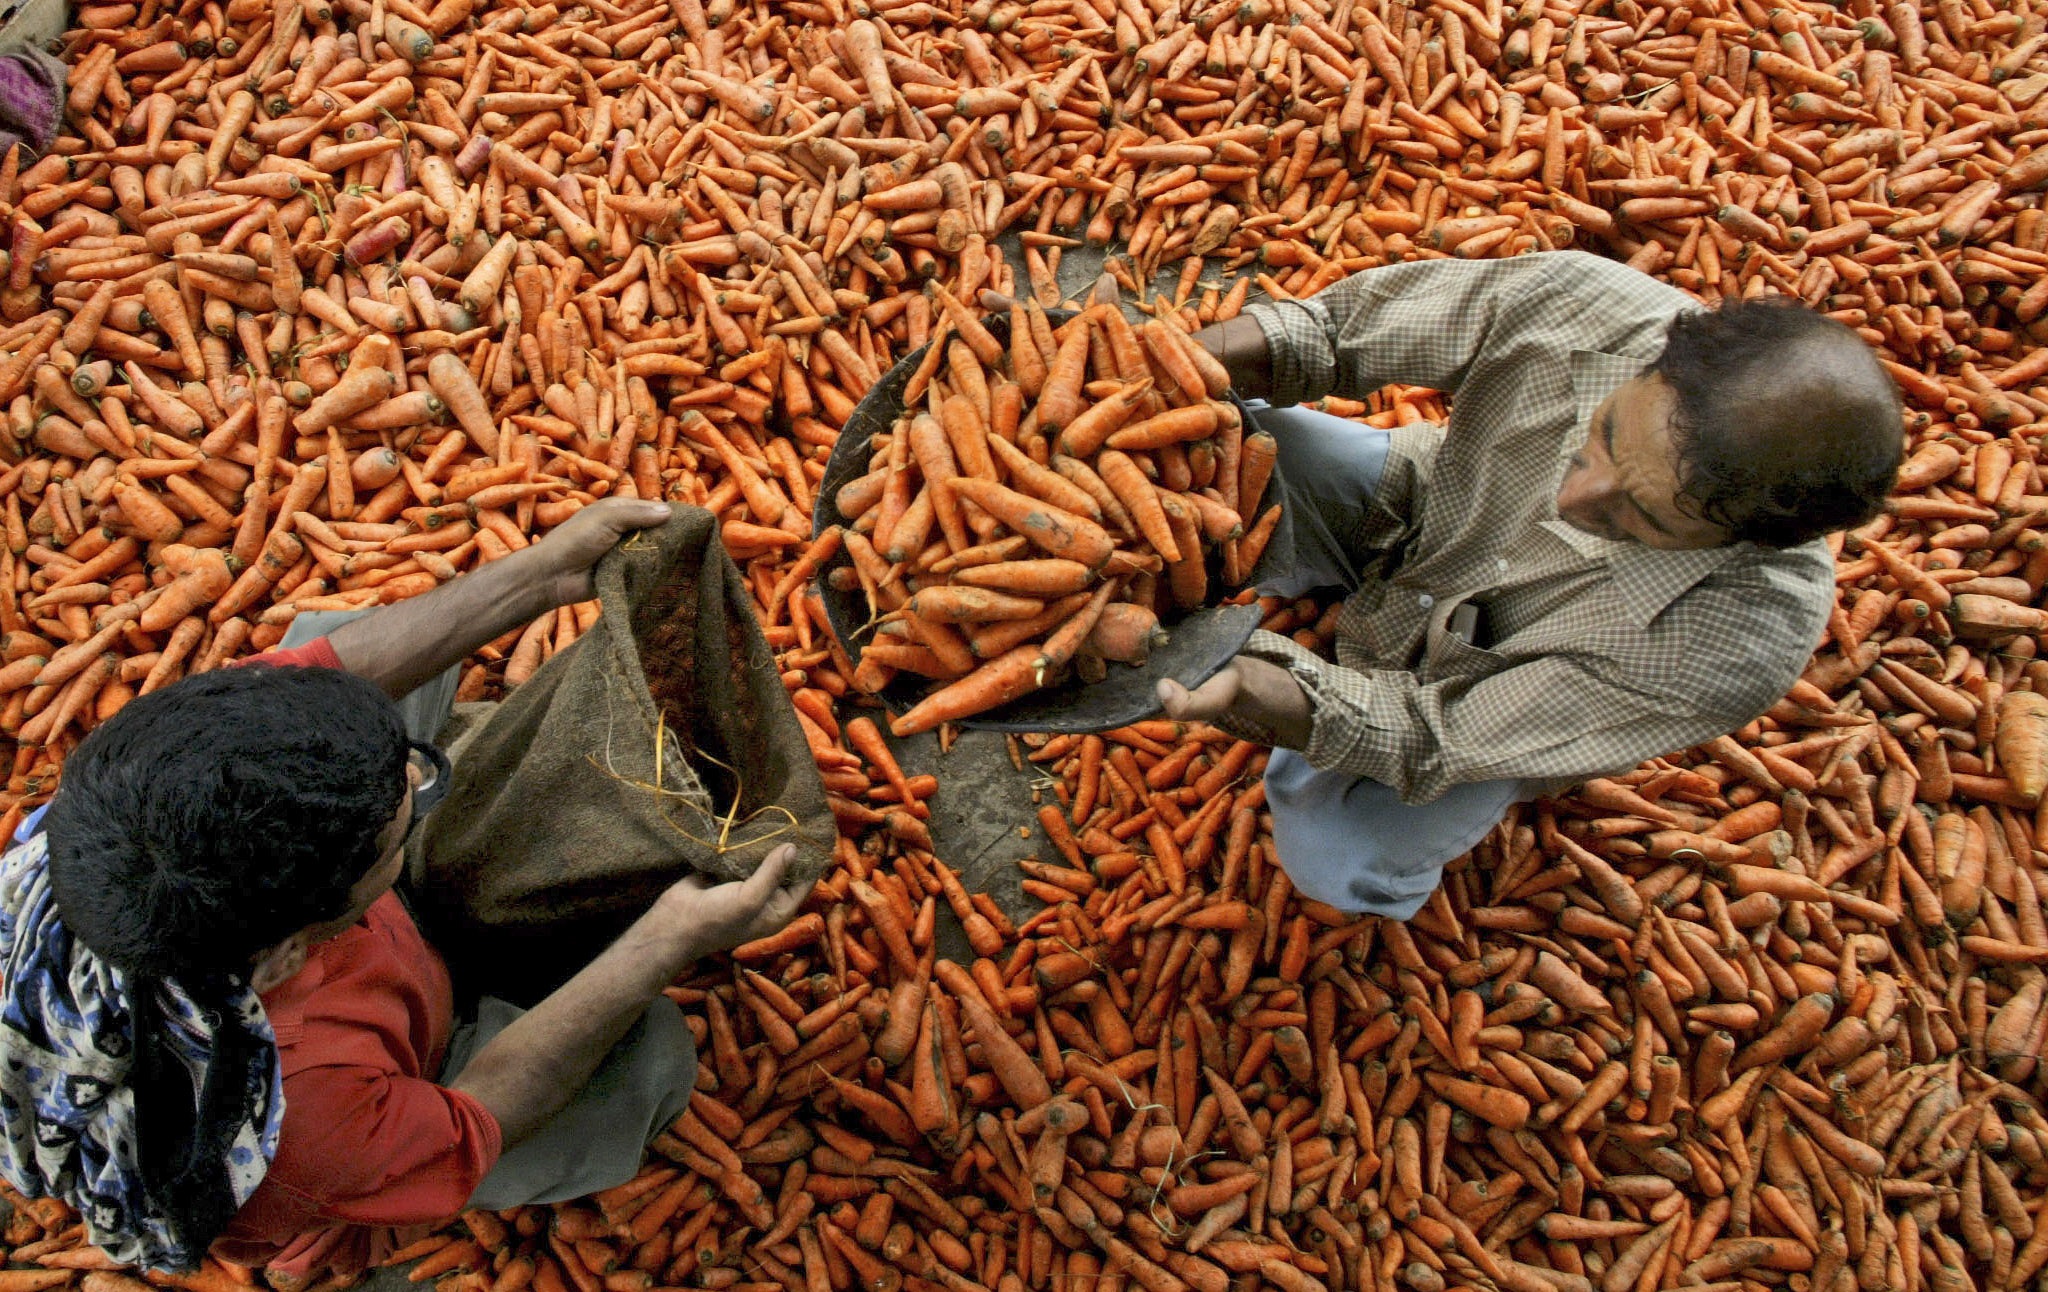 Laborers pack carrots into bags at a wholesale market in Jammu, India. Photographer: Channi Anand/AP Photos
